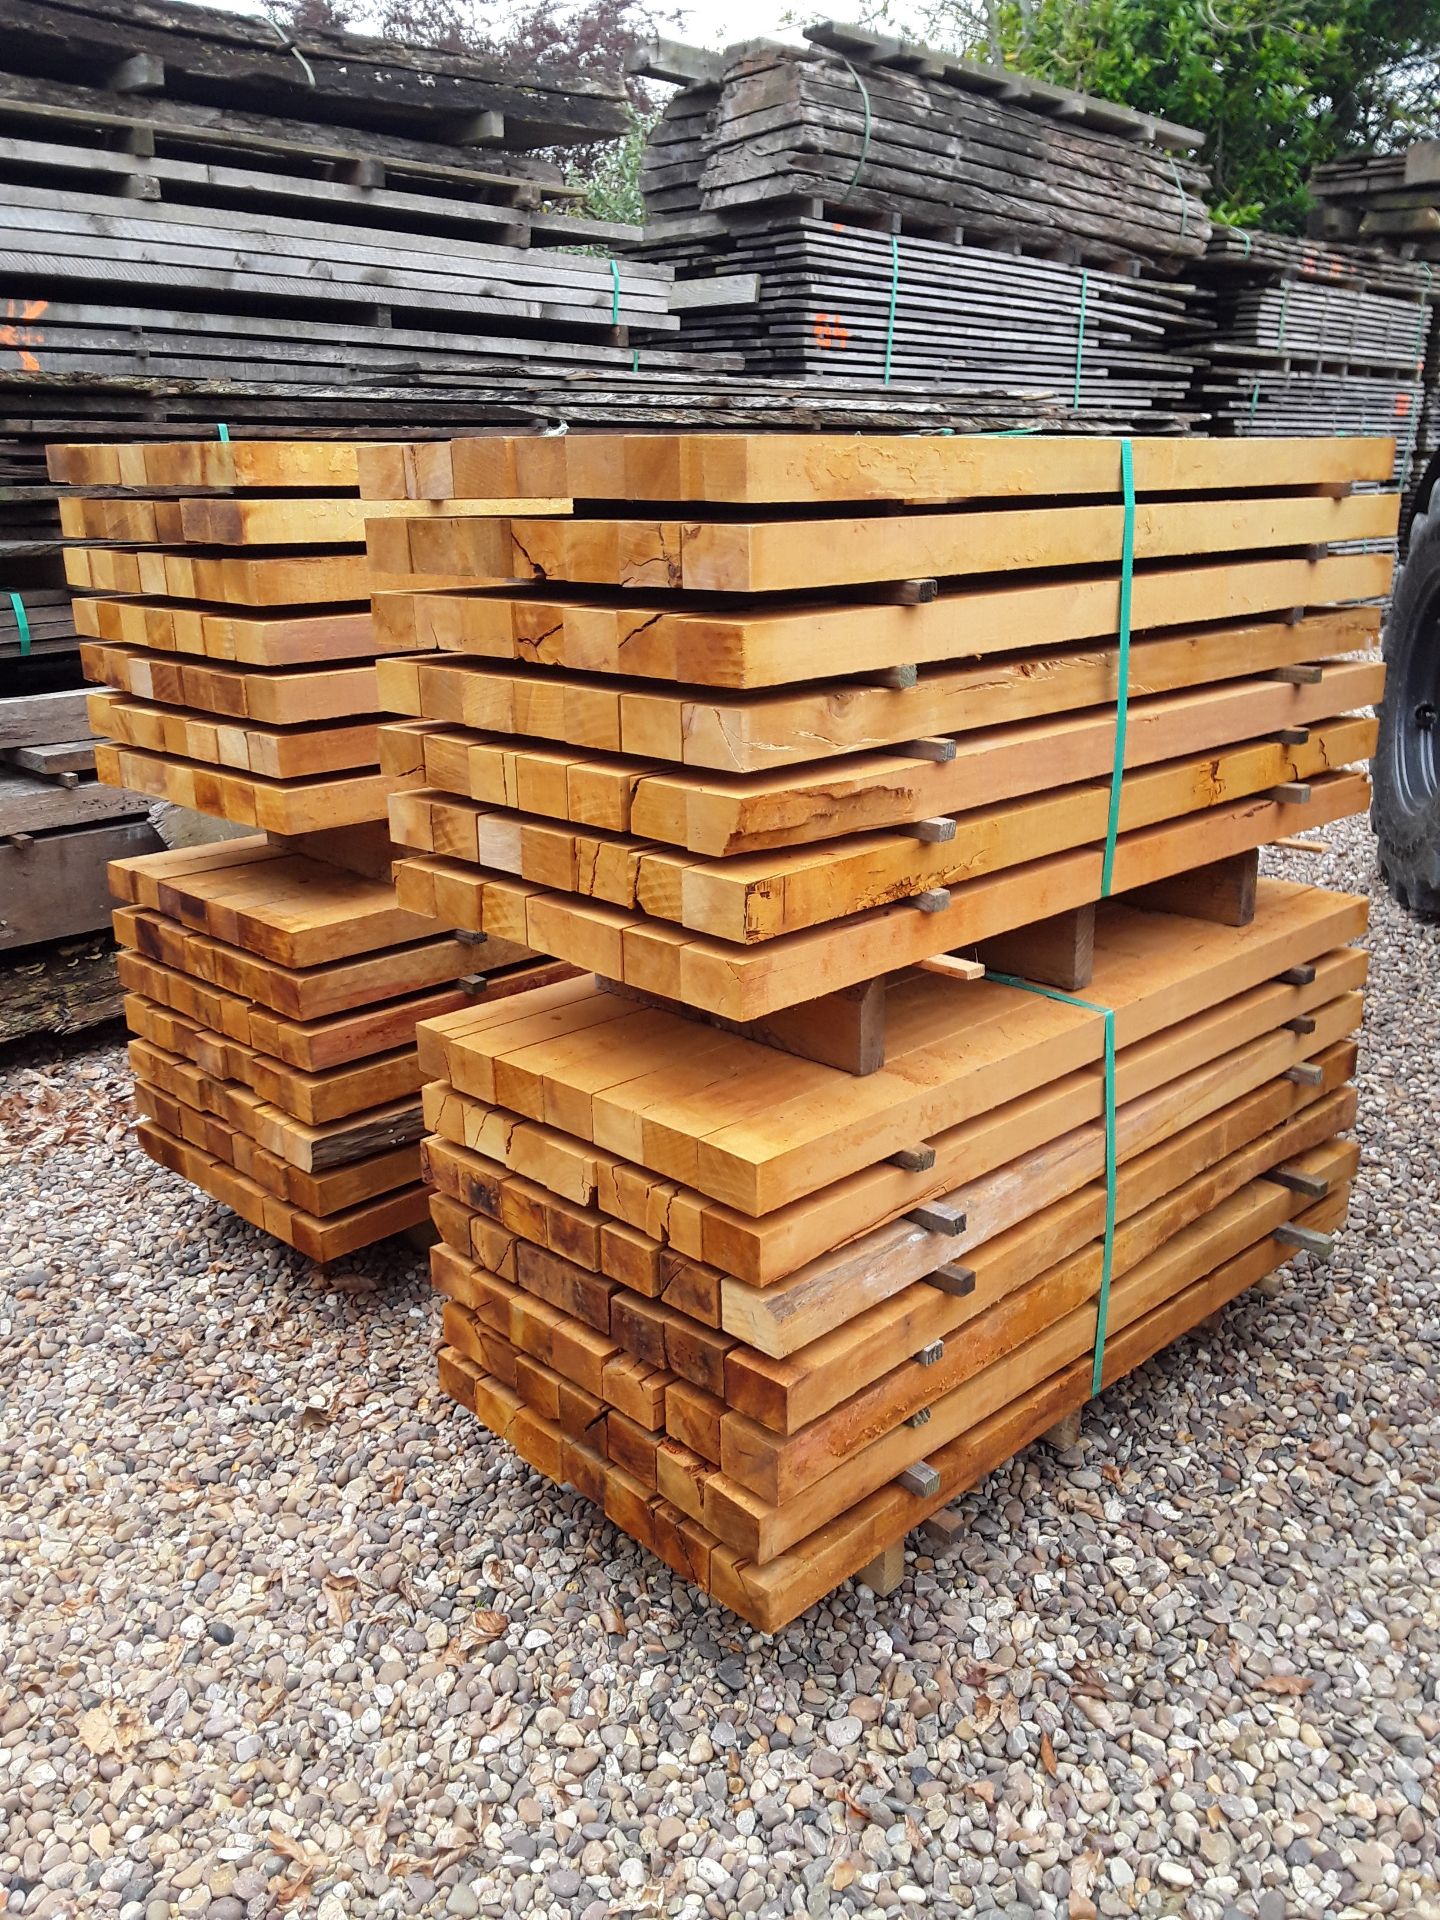 50 x Hardwood Sawn African Opepe Posts / Timber Offcuts